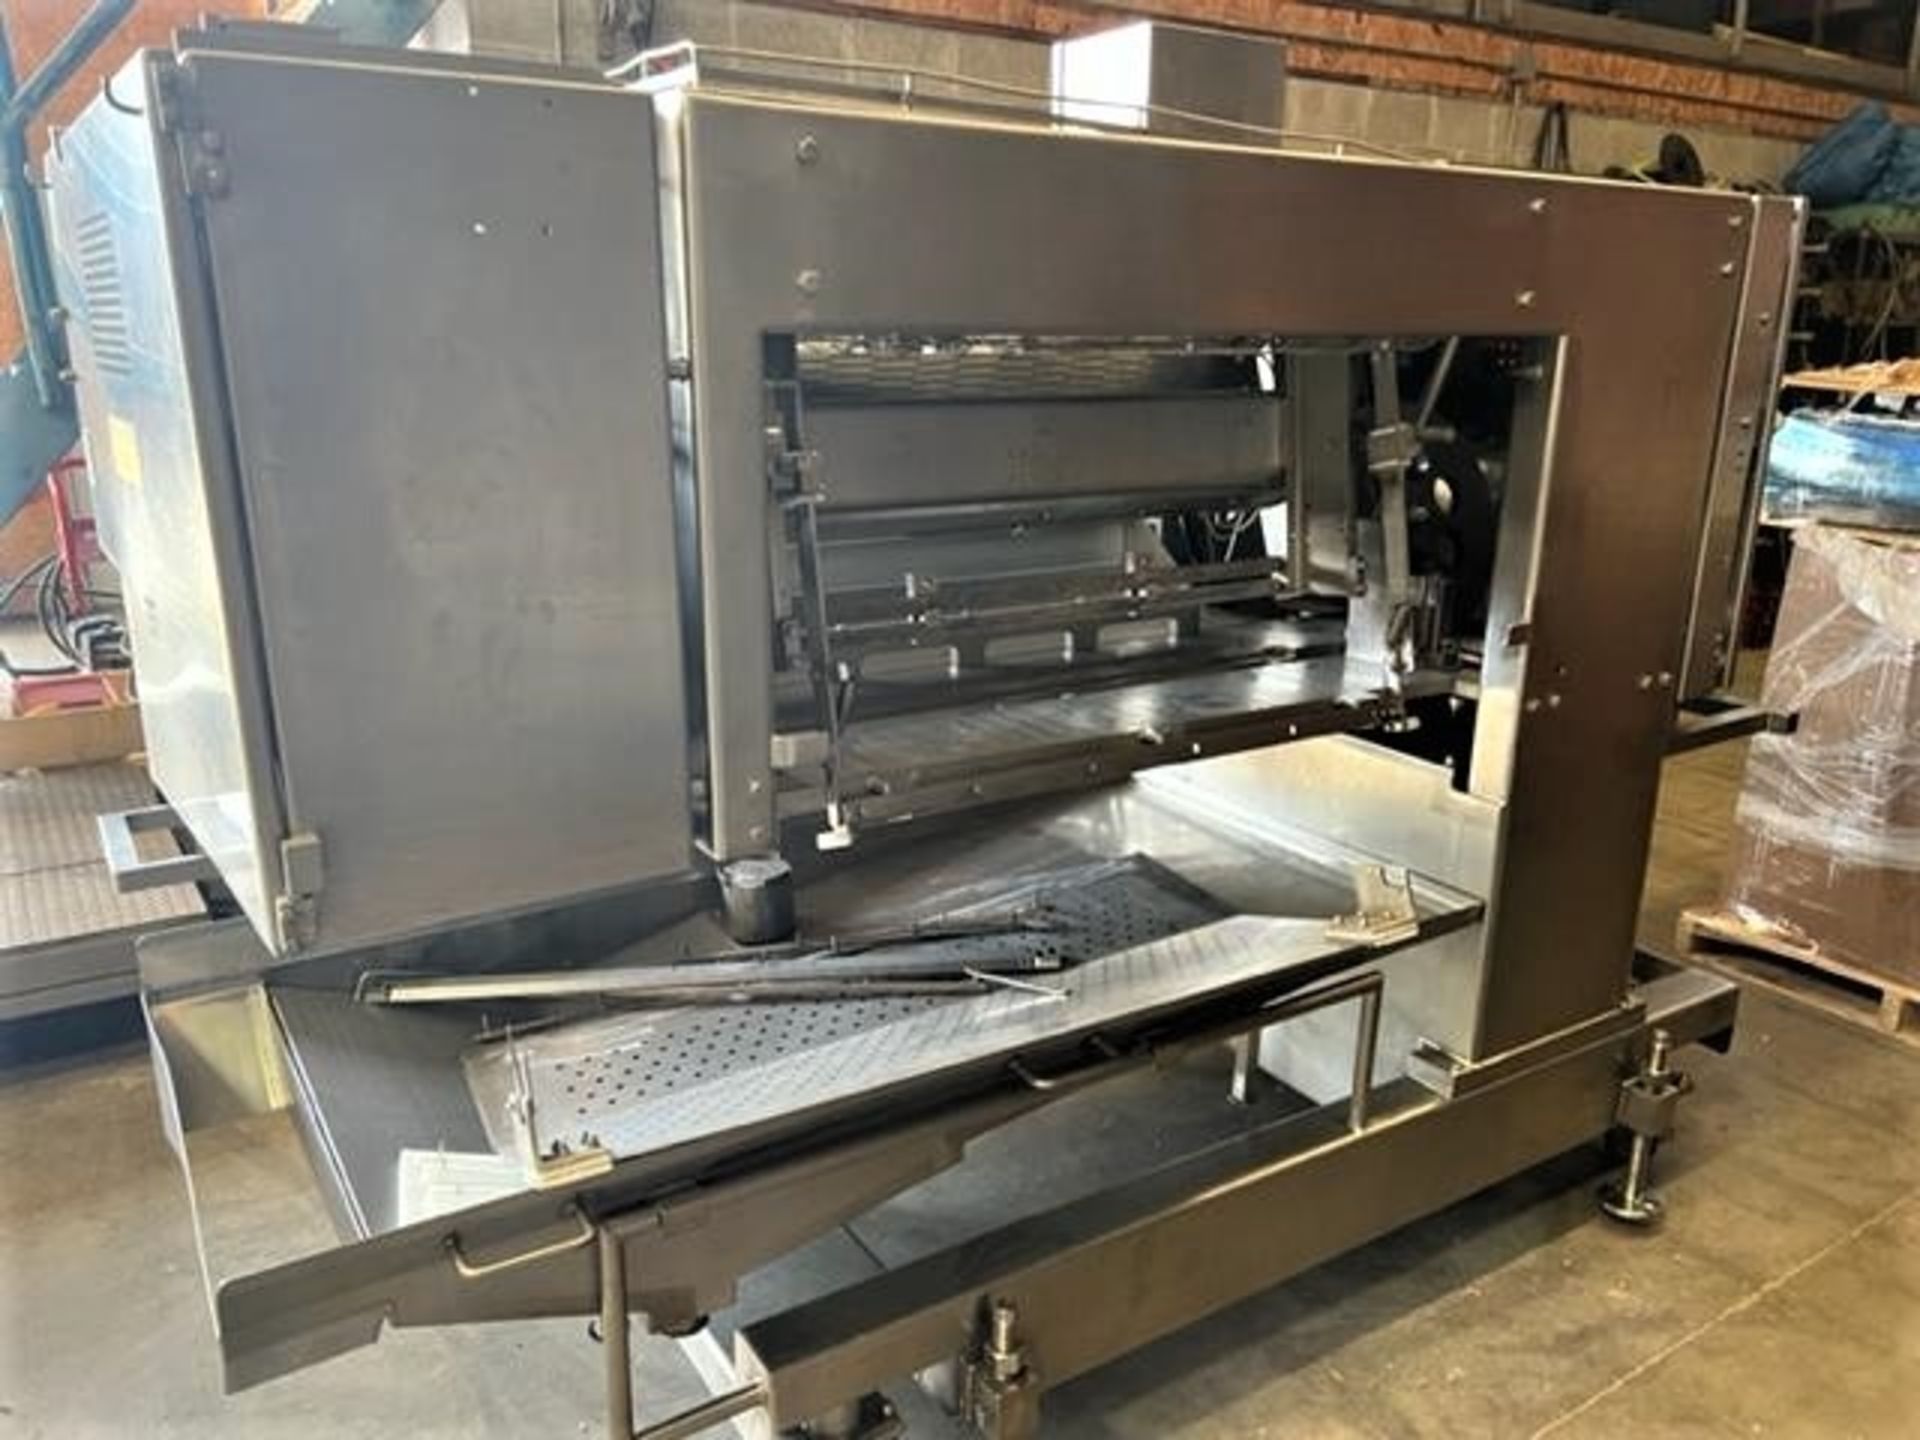 Grote S/S Sanitary Slicer/Applicator, Model S/A, We have Many Different Sizes of Tooling for this - Image 14 of 15